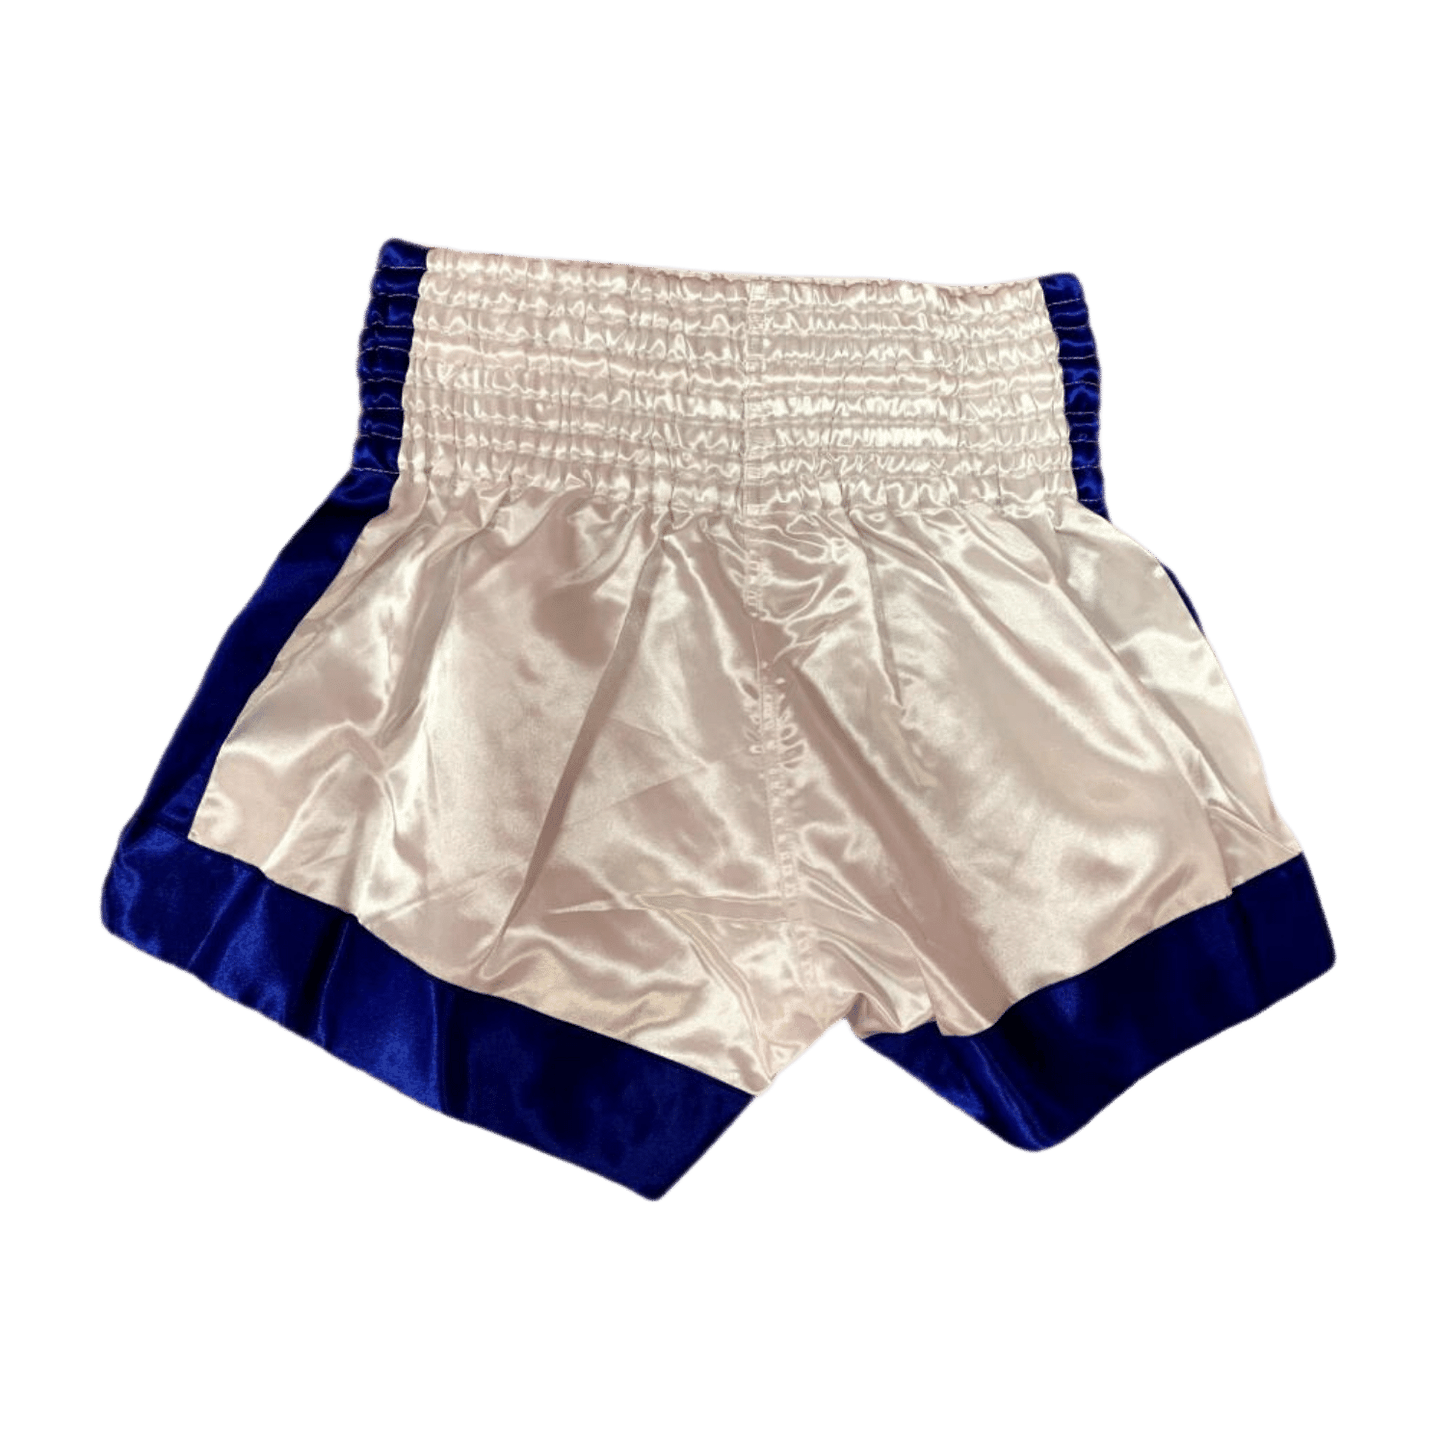 A Blue and White Classic Muay Thai Boxing Shorts by Hanuthai on a white background.